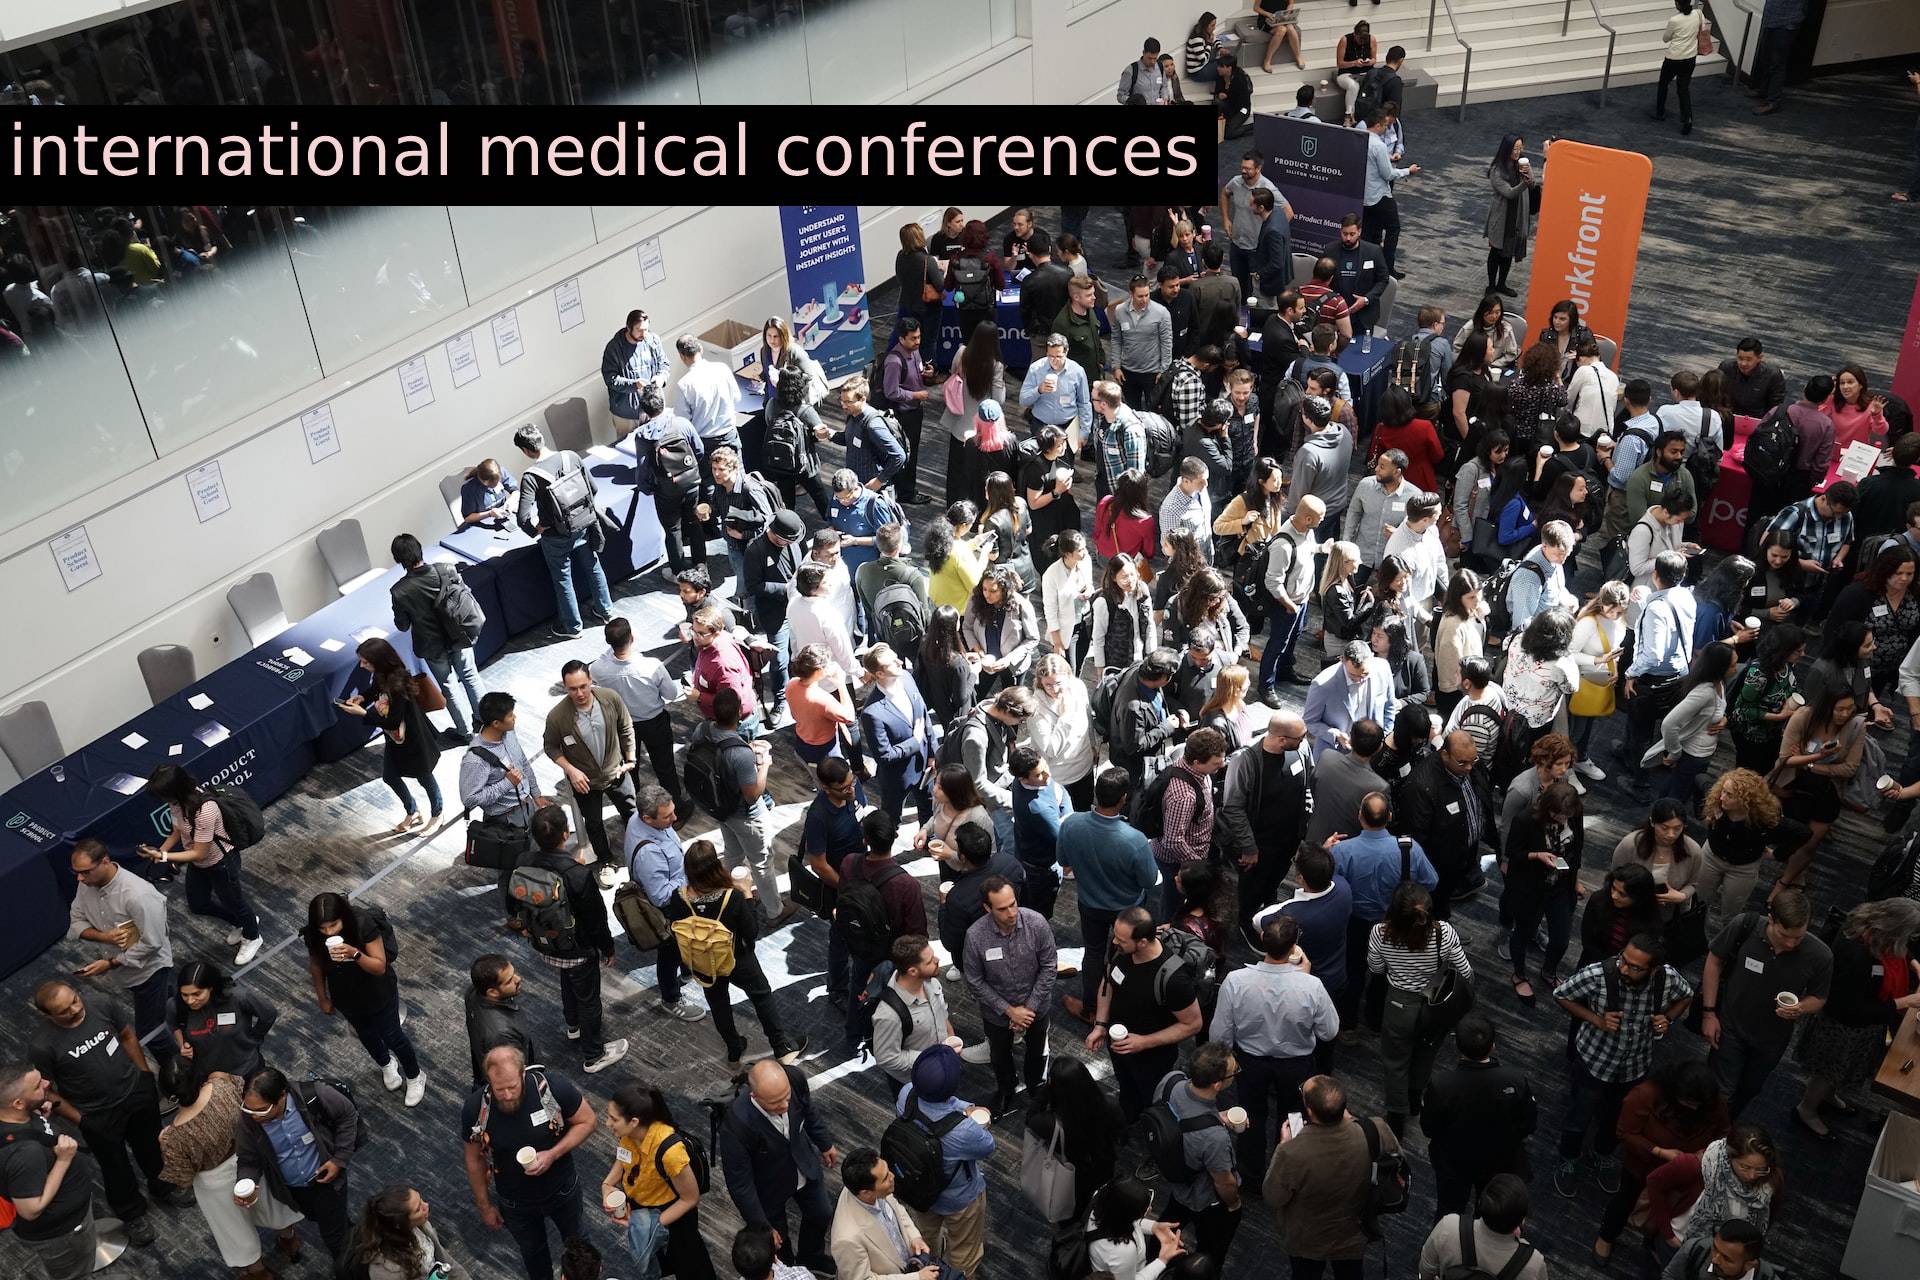 Facts to know about international medical conference